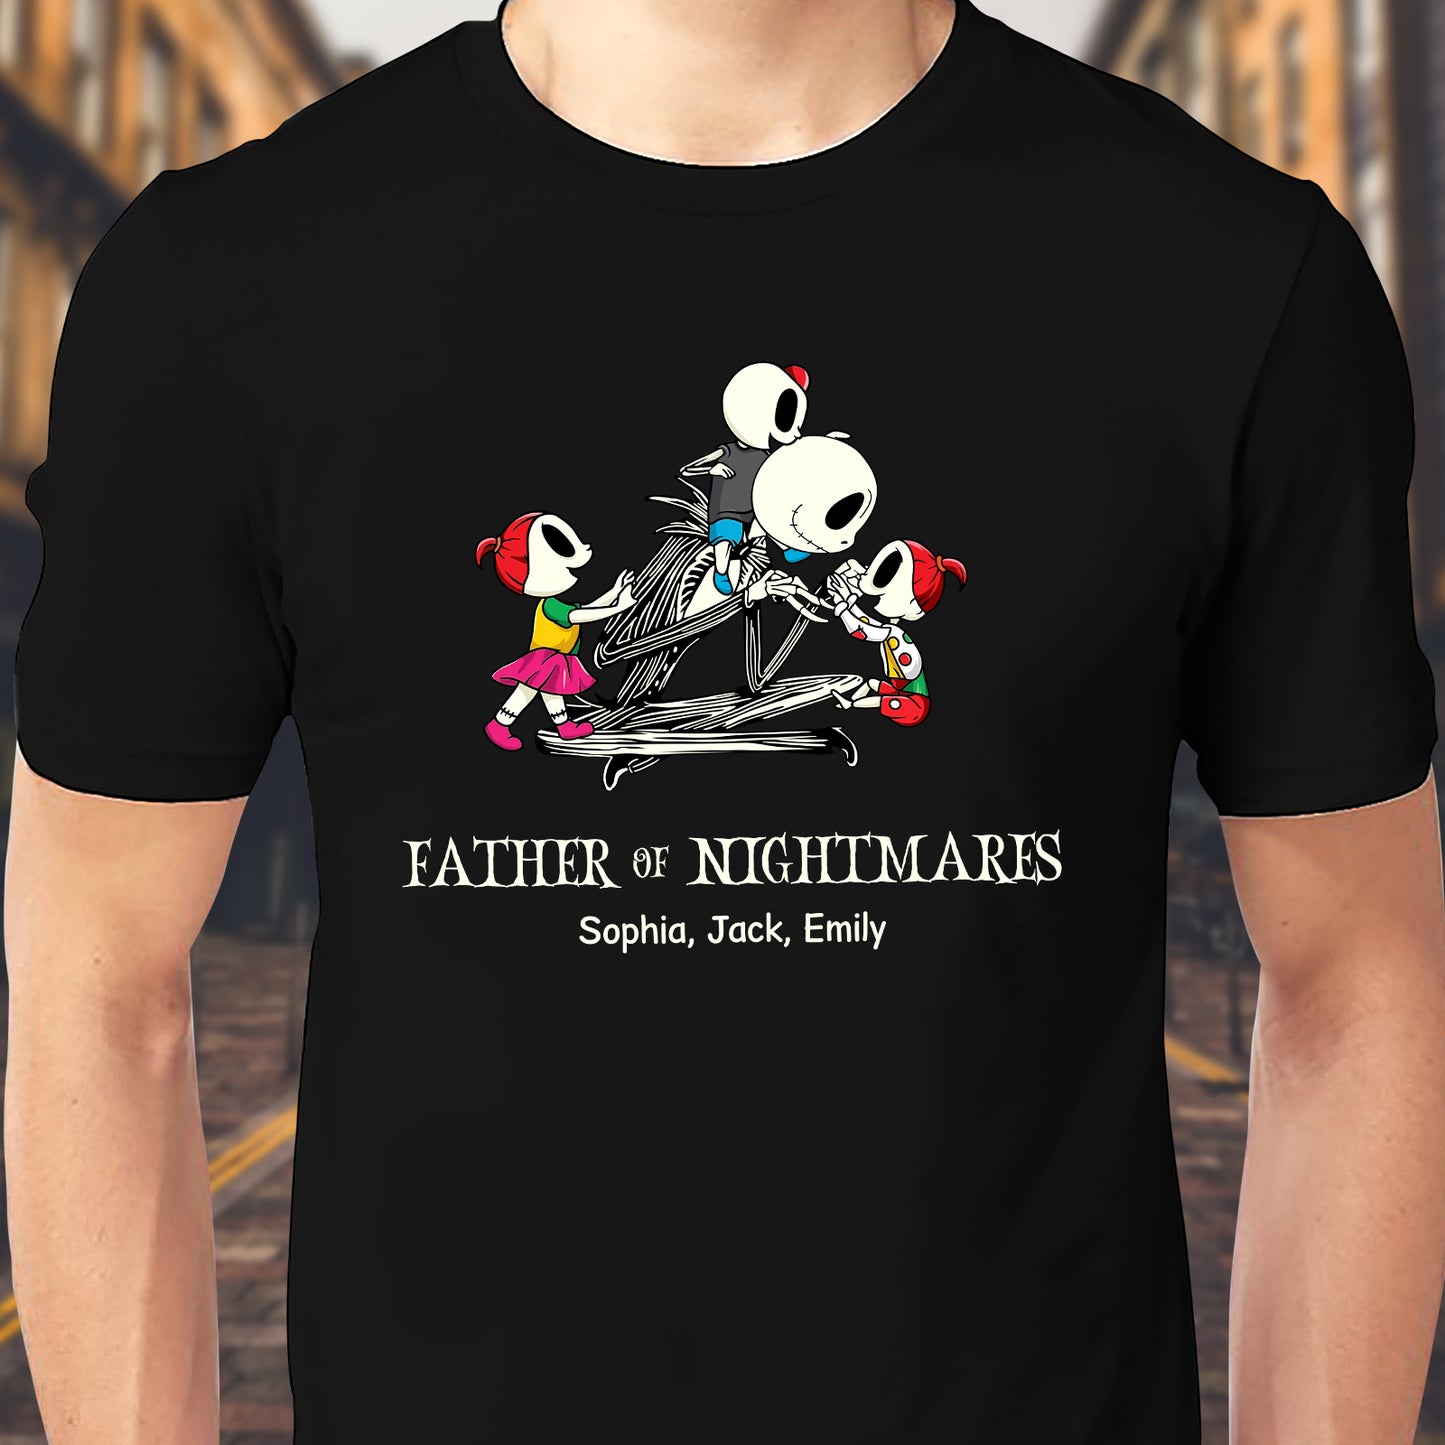 Family- Mother Of Nightmares - Mom and Children Personalized Shirt